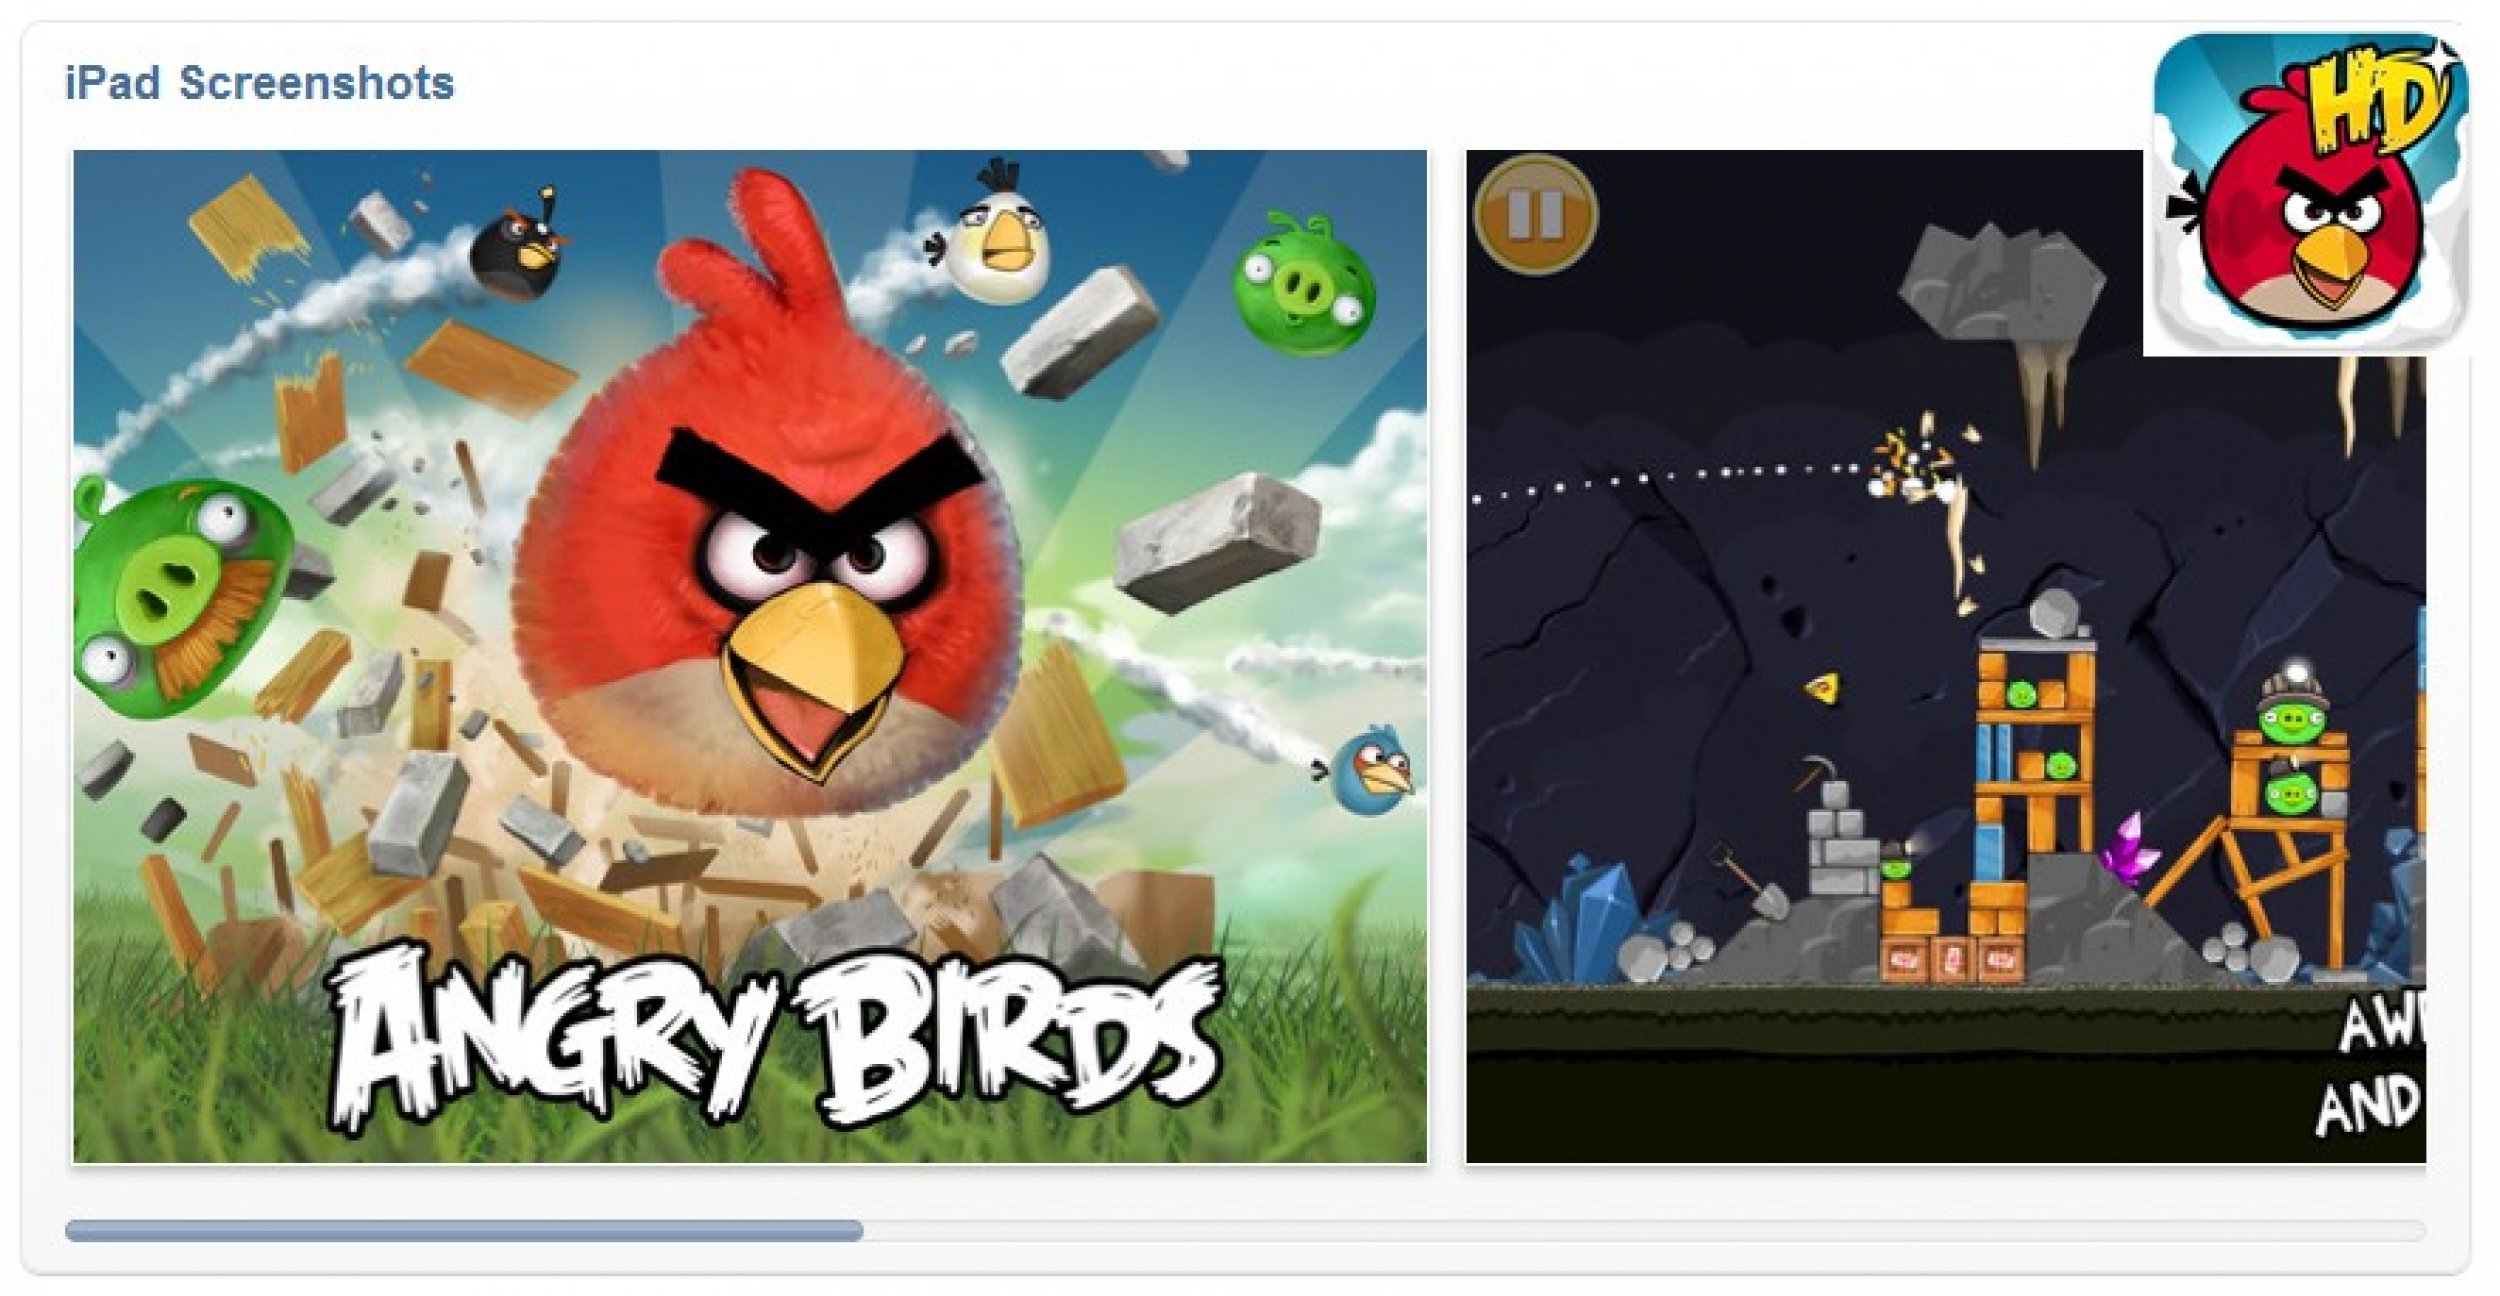 Angry Birds HD Game - Top 50 must-have iPad apps